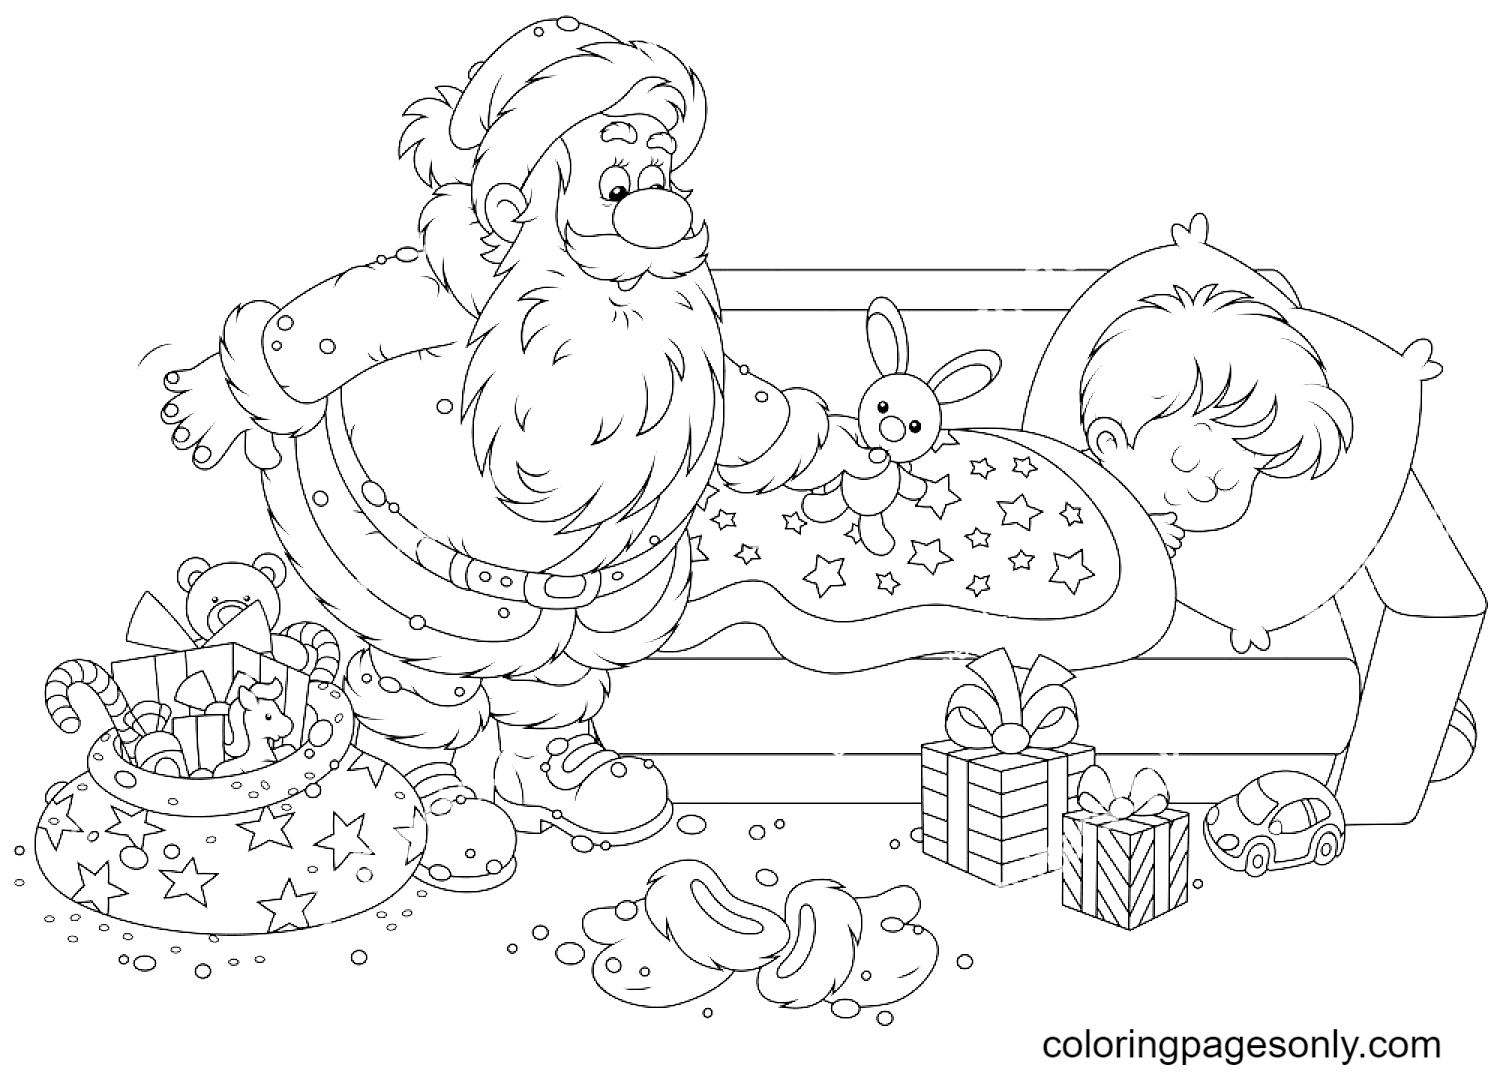 Santa Claus Putting Presents by the Bed of a Sleeping Boy Coloring Pages